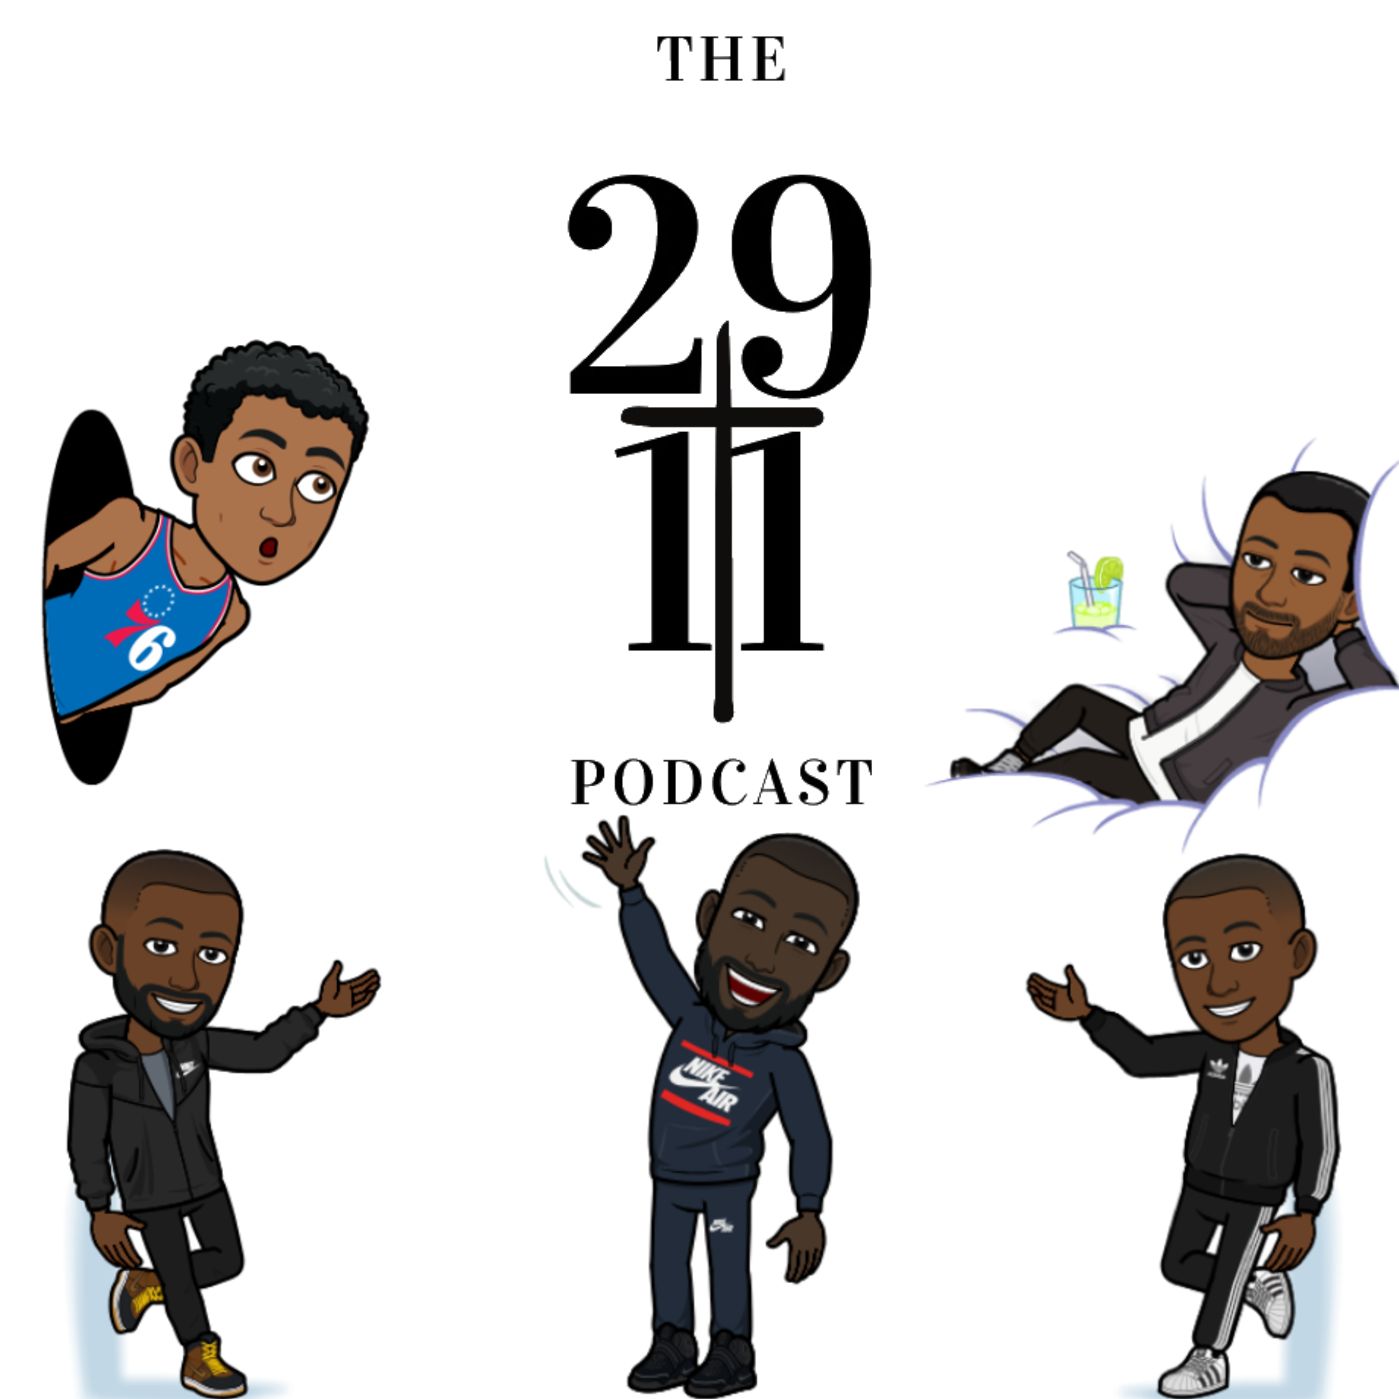 Episode 63 - Napz: Quitting his job, month trip to Eritrea & Journeying with God